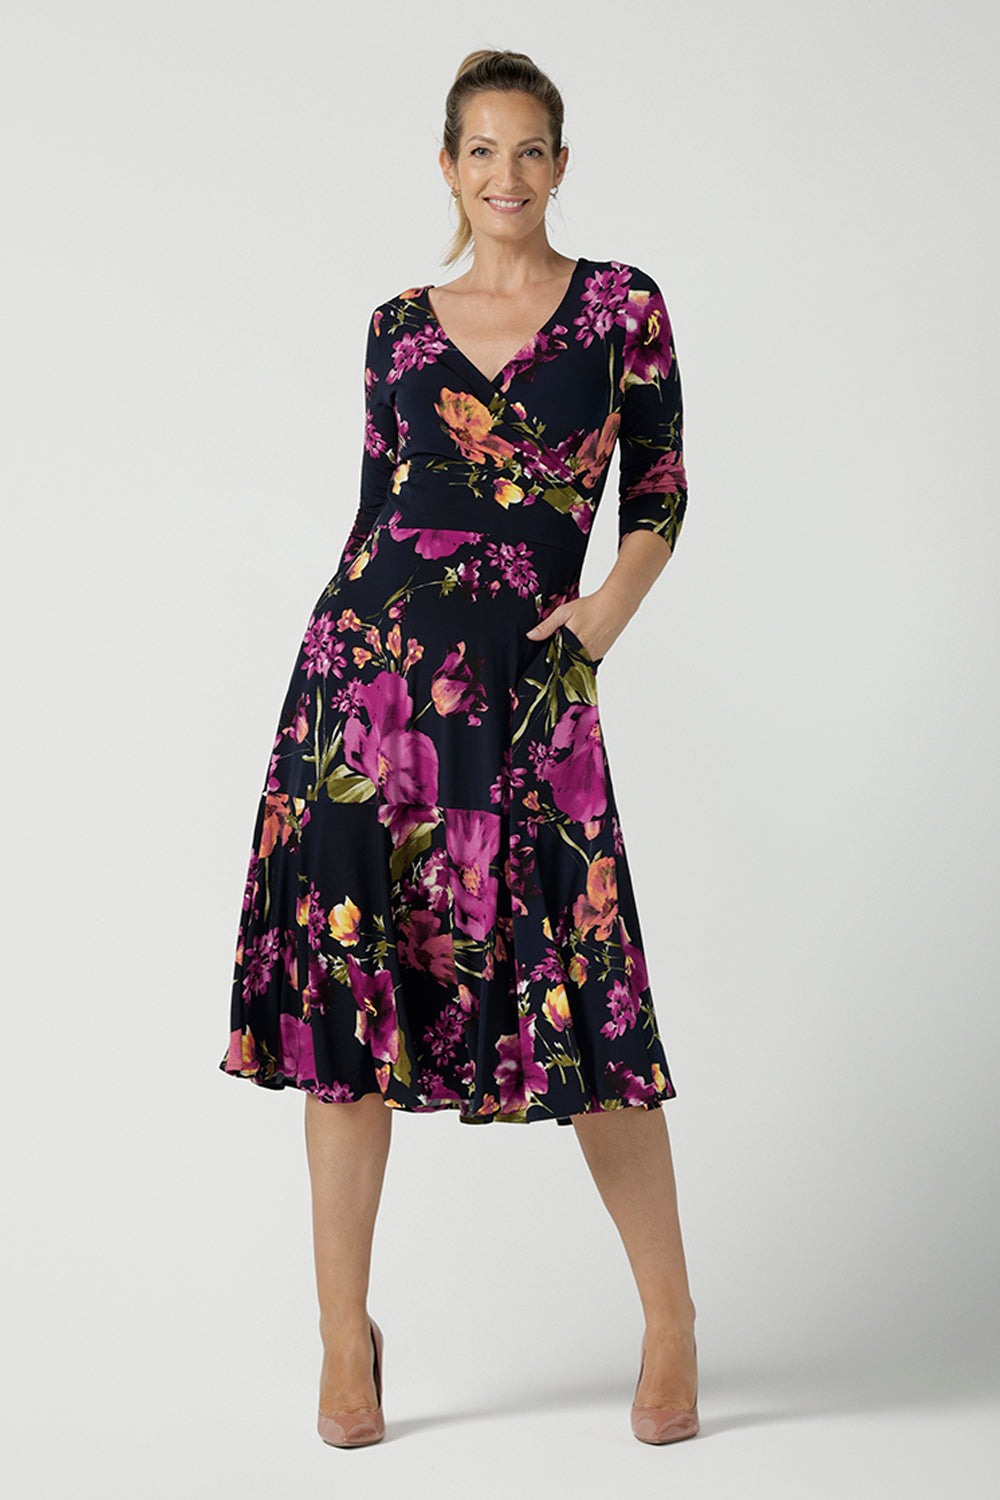 A size 10 Woman wears the Bettina Petite Reversible dress the Celeste print. It is a fixed wrap style with pockets and frill detail. A great work to wedding dress for women size 8 - 24.  